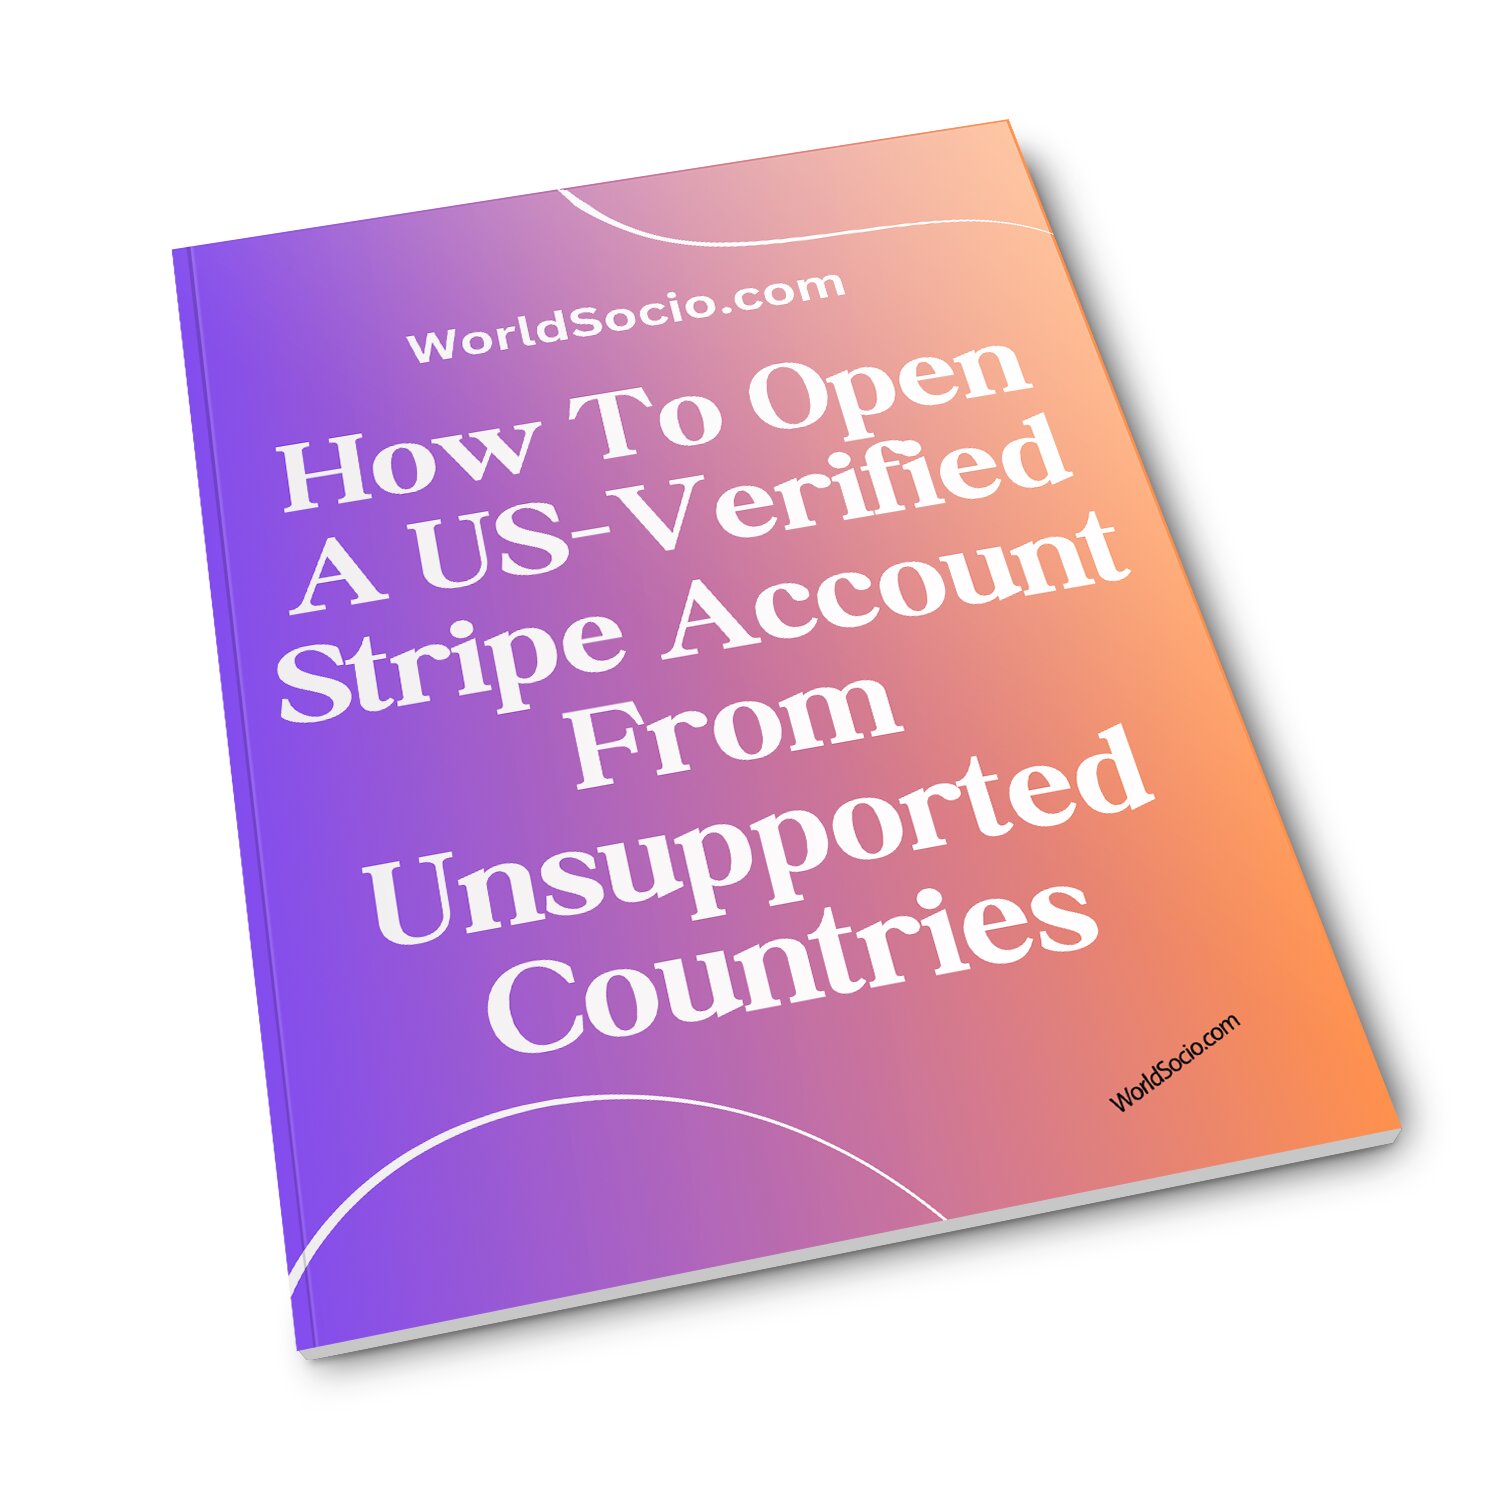 step-by-step-how-to-open-a-us-verified-stripe-account-from-unsupported-countries-jpg.1456